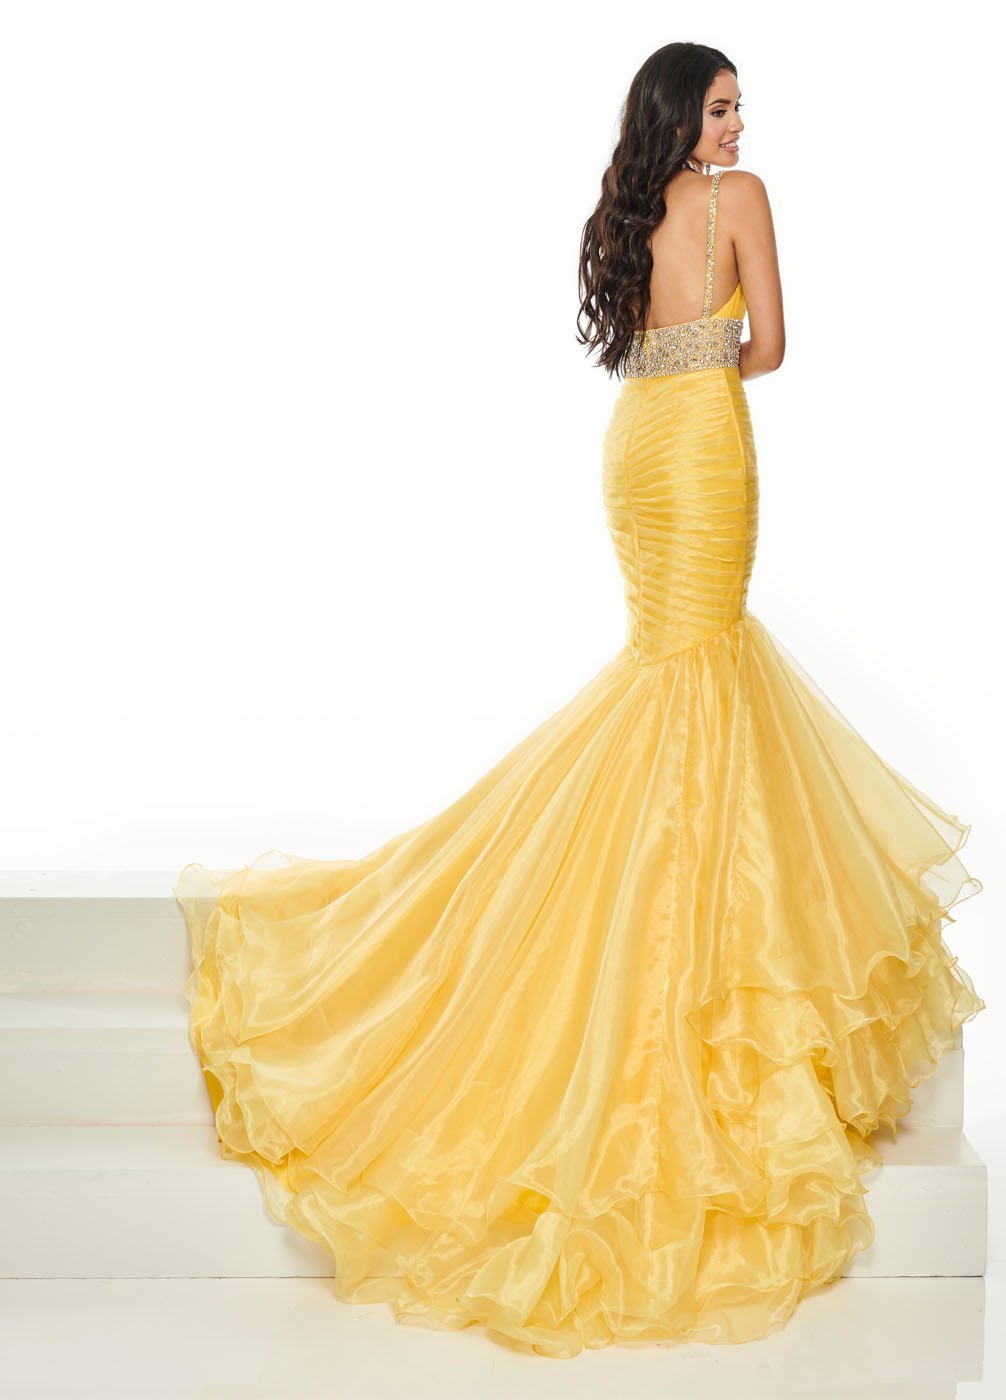 PrimaDonna by Rachel Allan 5108 dress images in these colors: Yellow, Red.